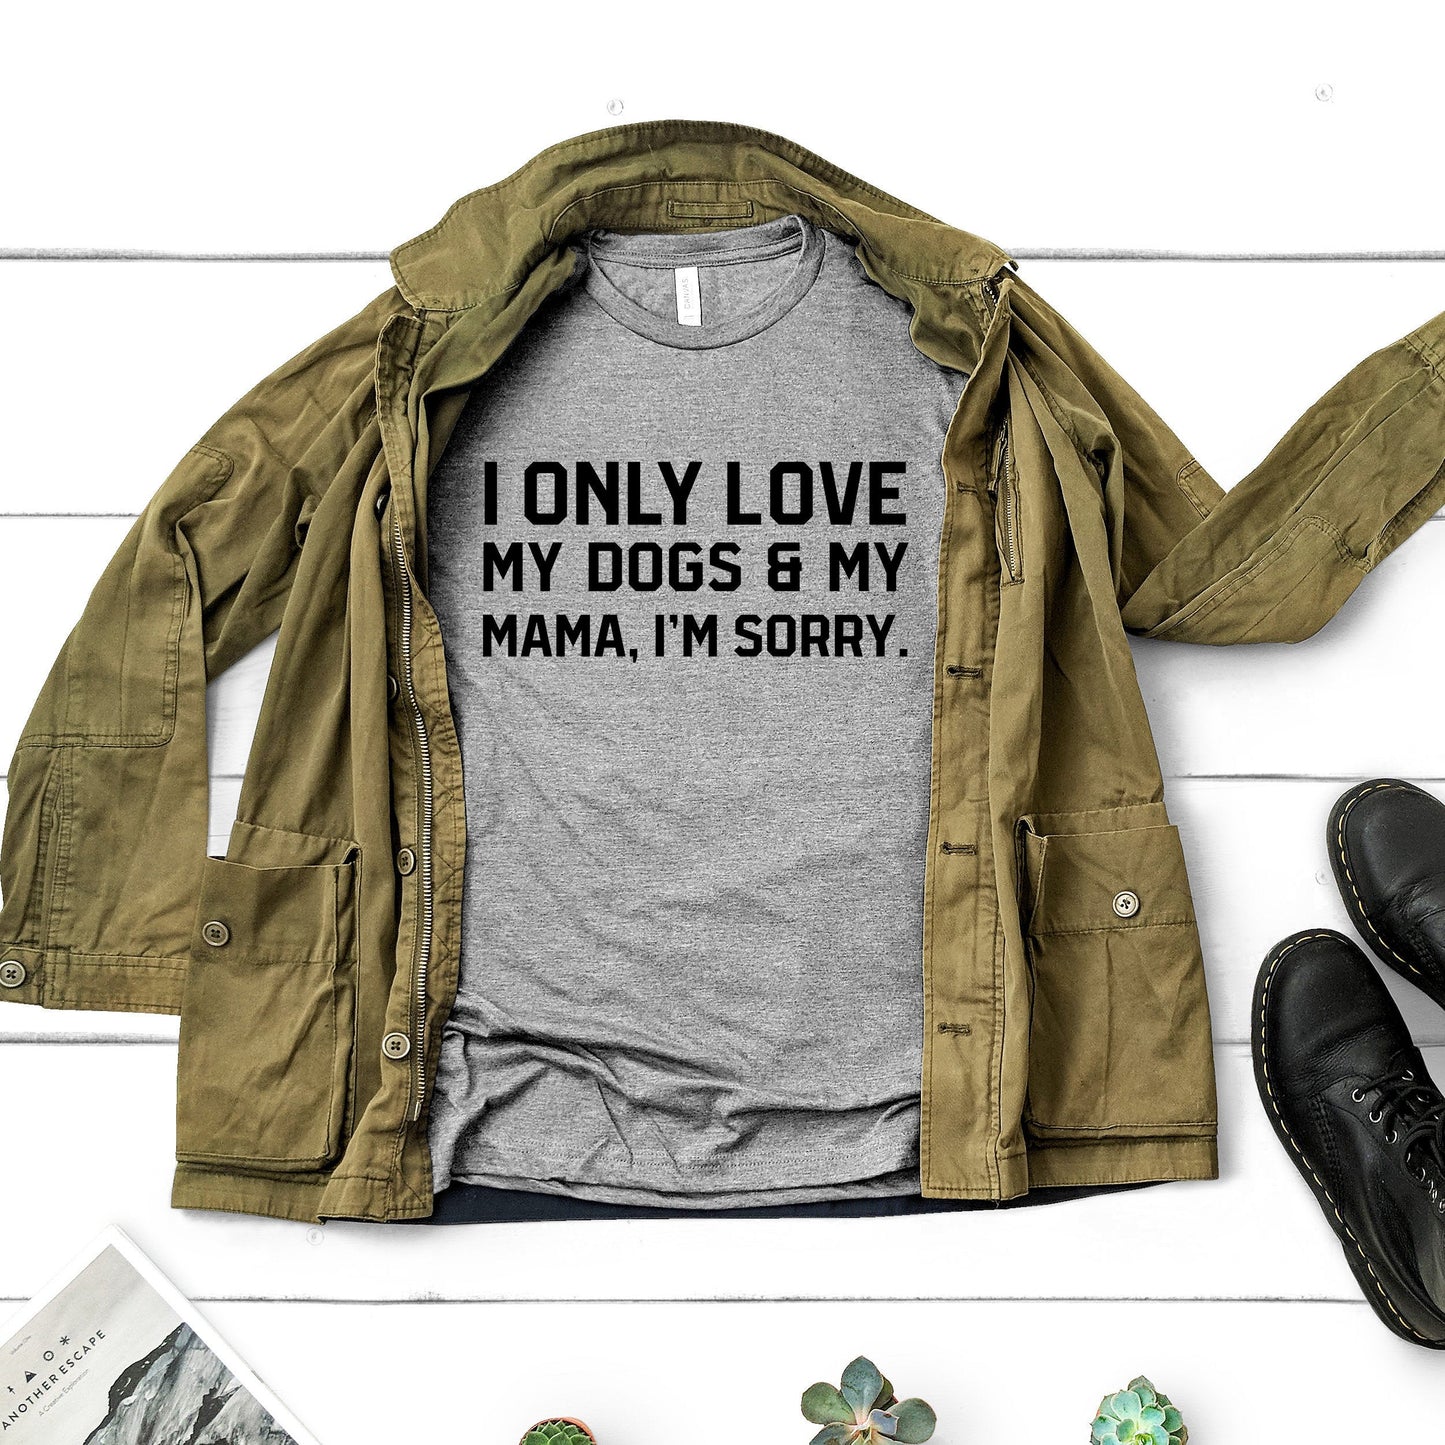 I Only Love My Dogs & My Mama, I'm Sorry Shirt | Short Sleeved Shirt | Multiple Color Options | Made To Order